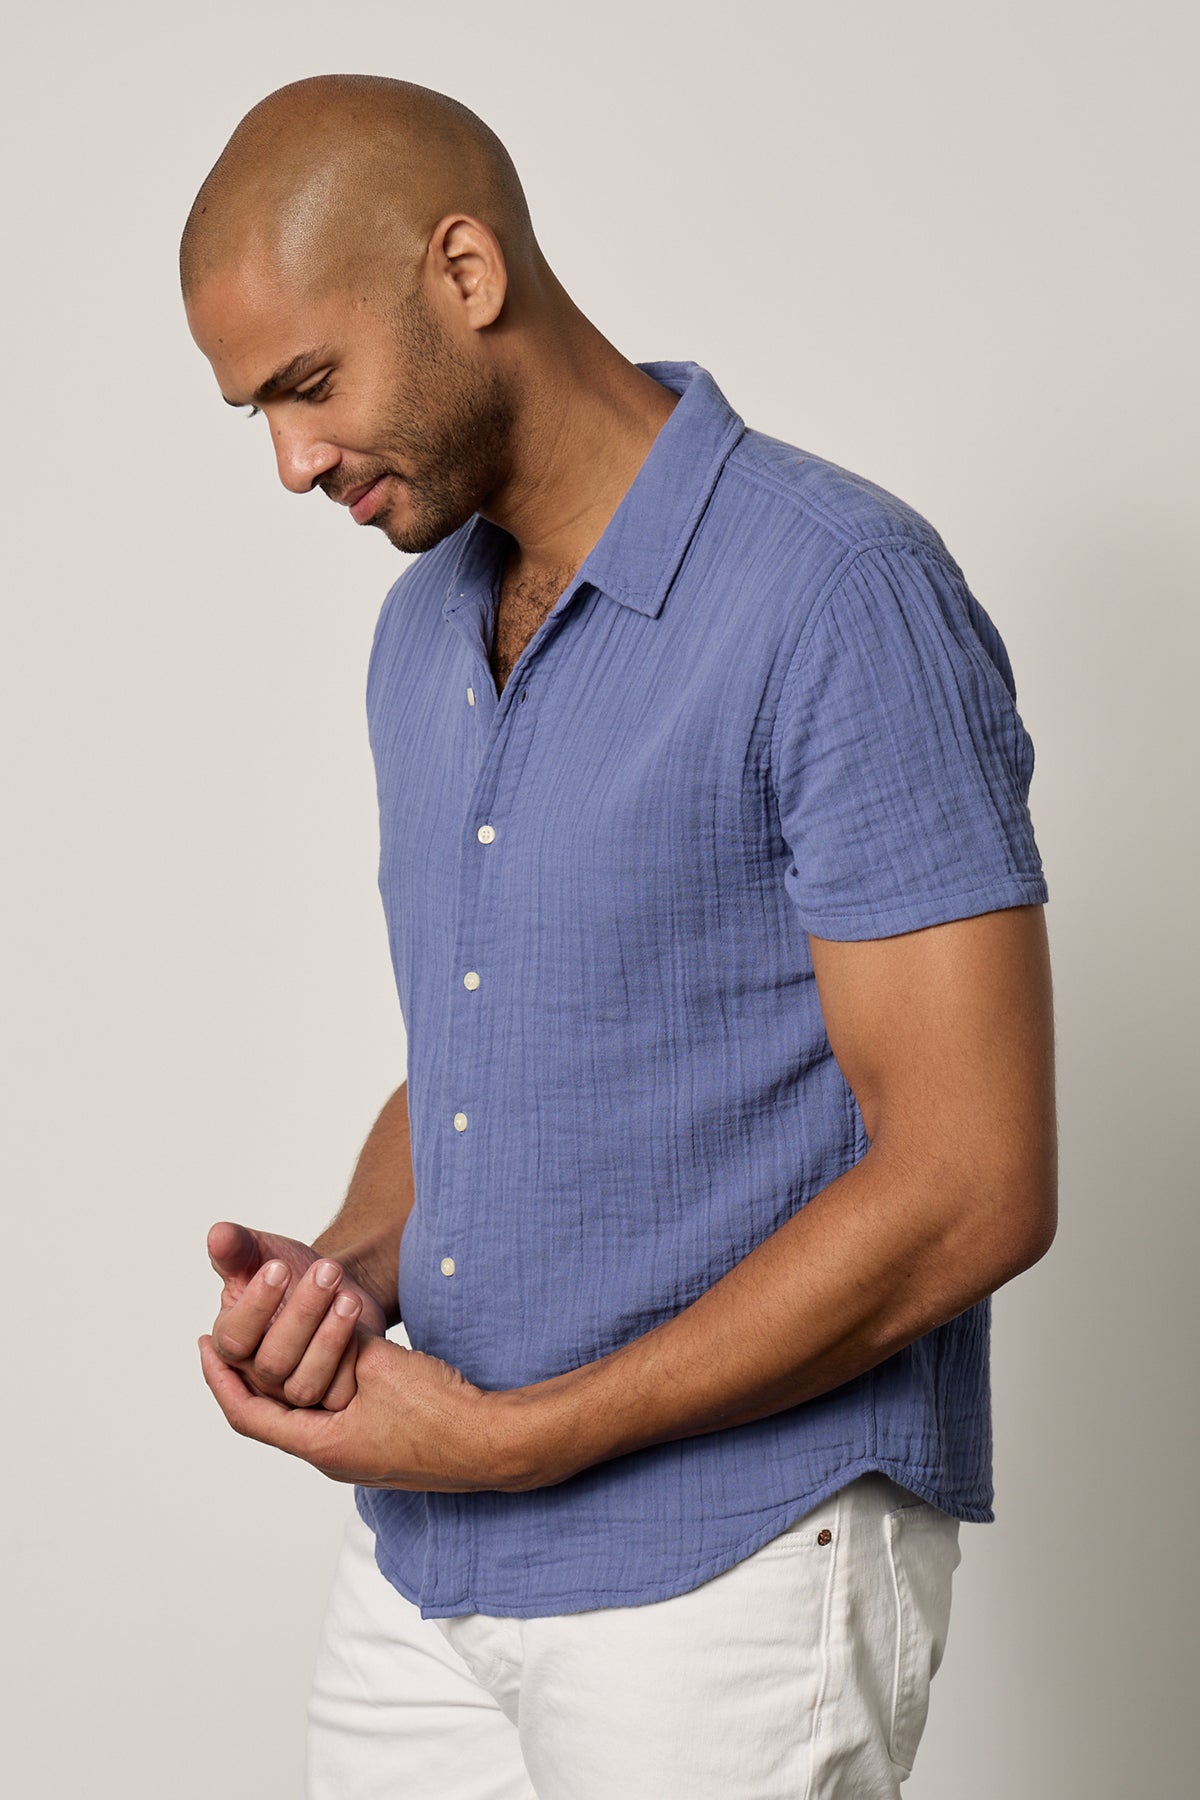   Christian Shirt in citadel blue with white denim front & side 